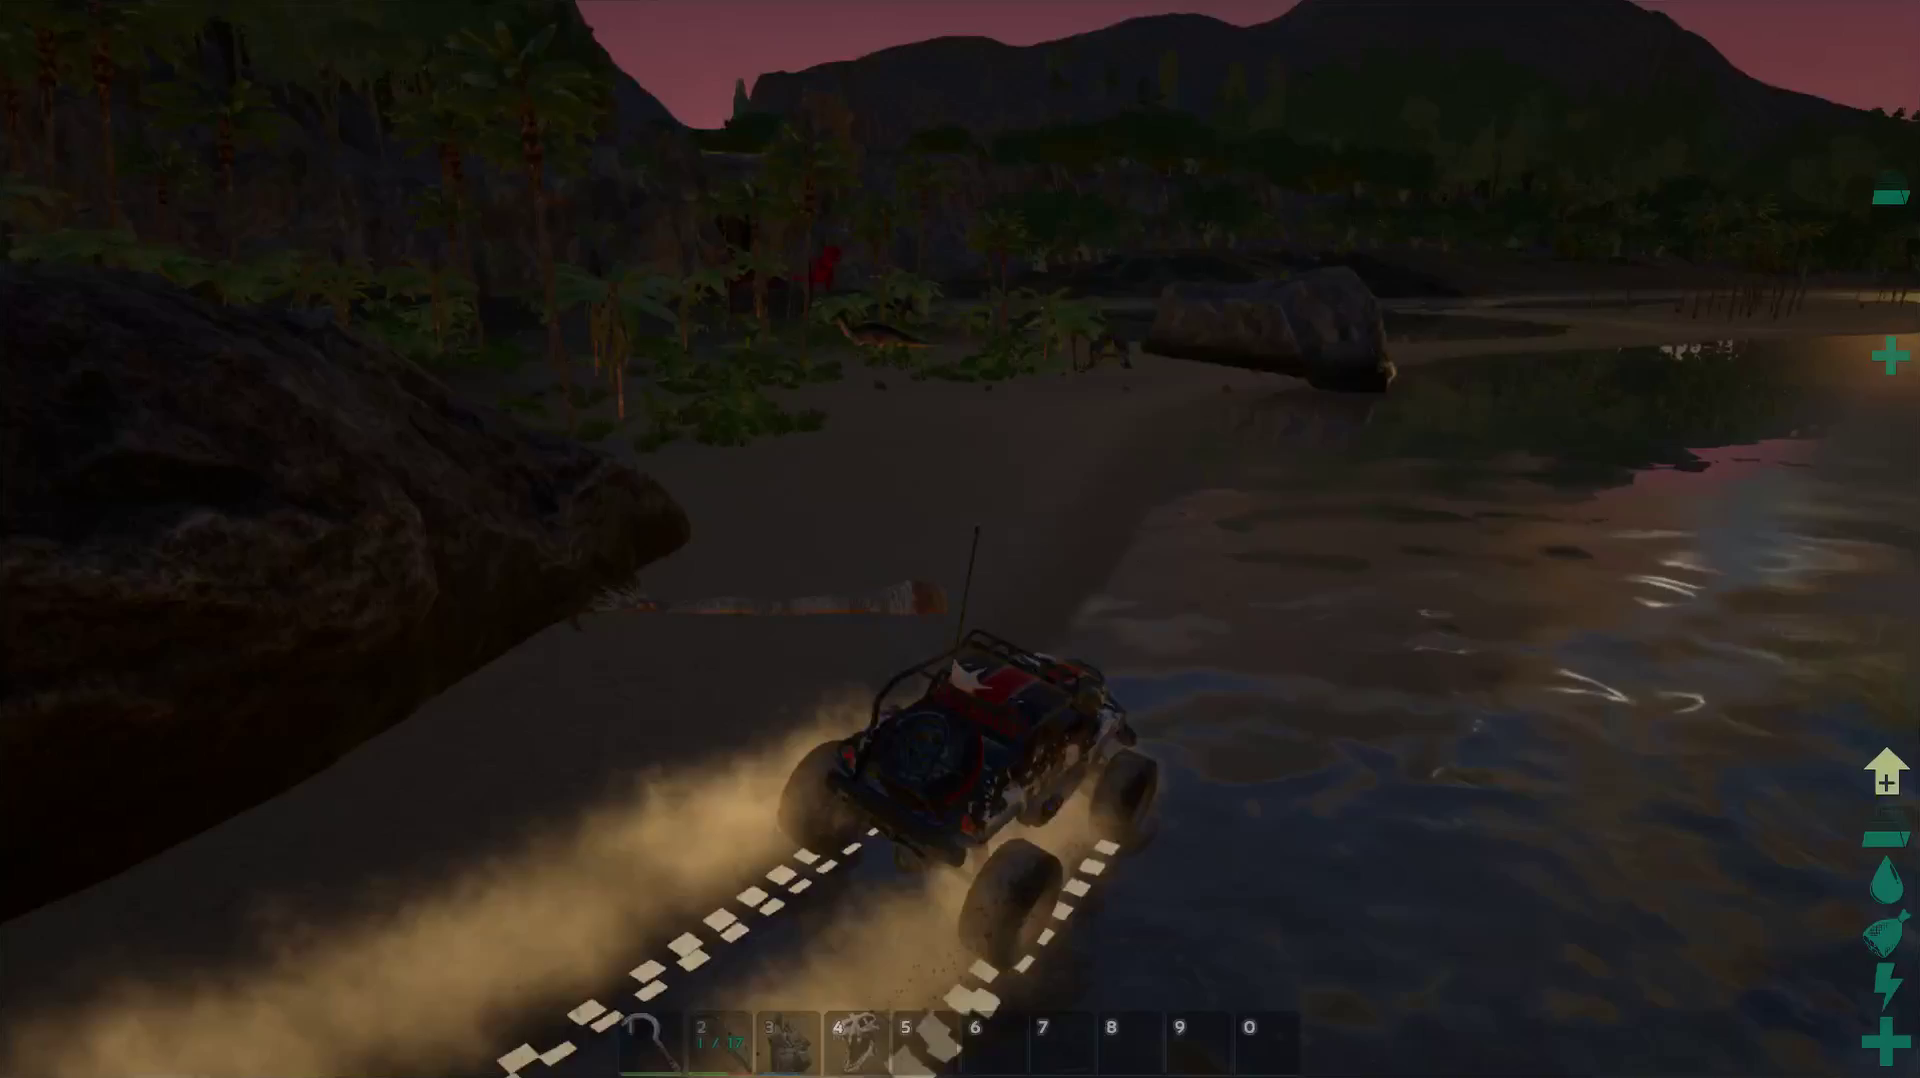 I hope the hilariously indestructible and overpowered dune buggy doesn’t get an update anytime soon. Heh!